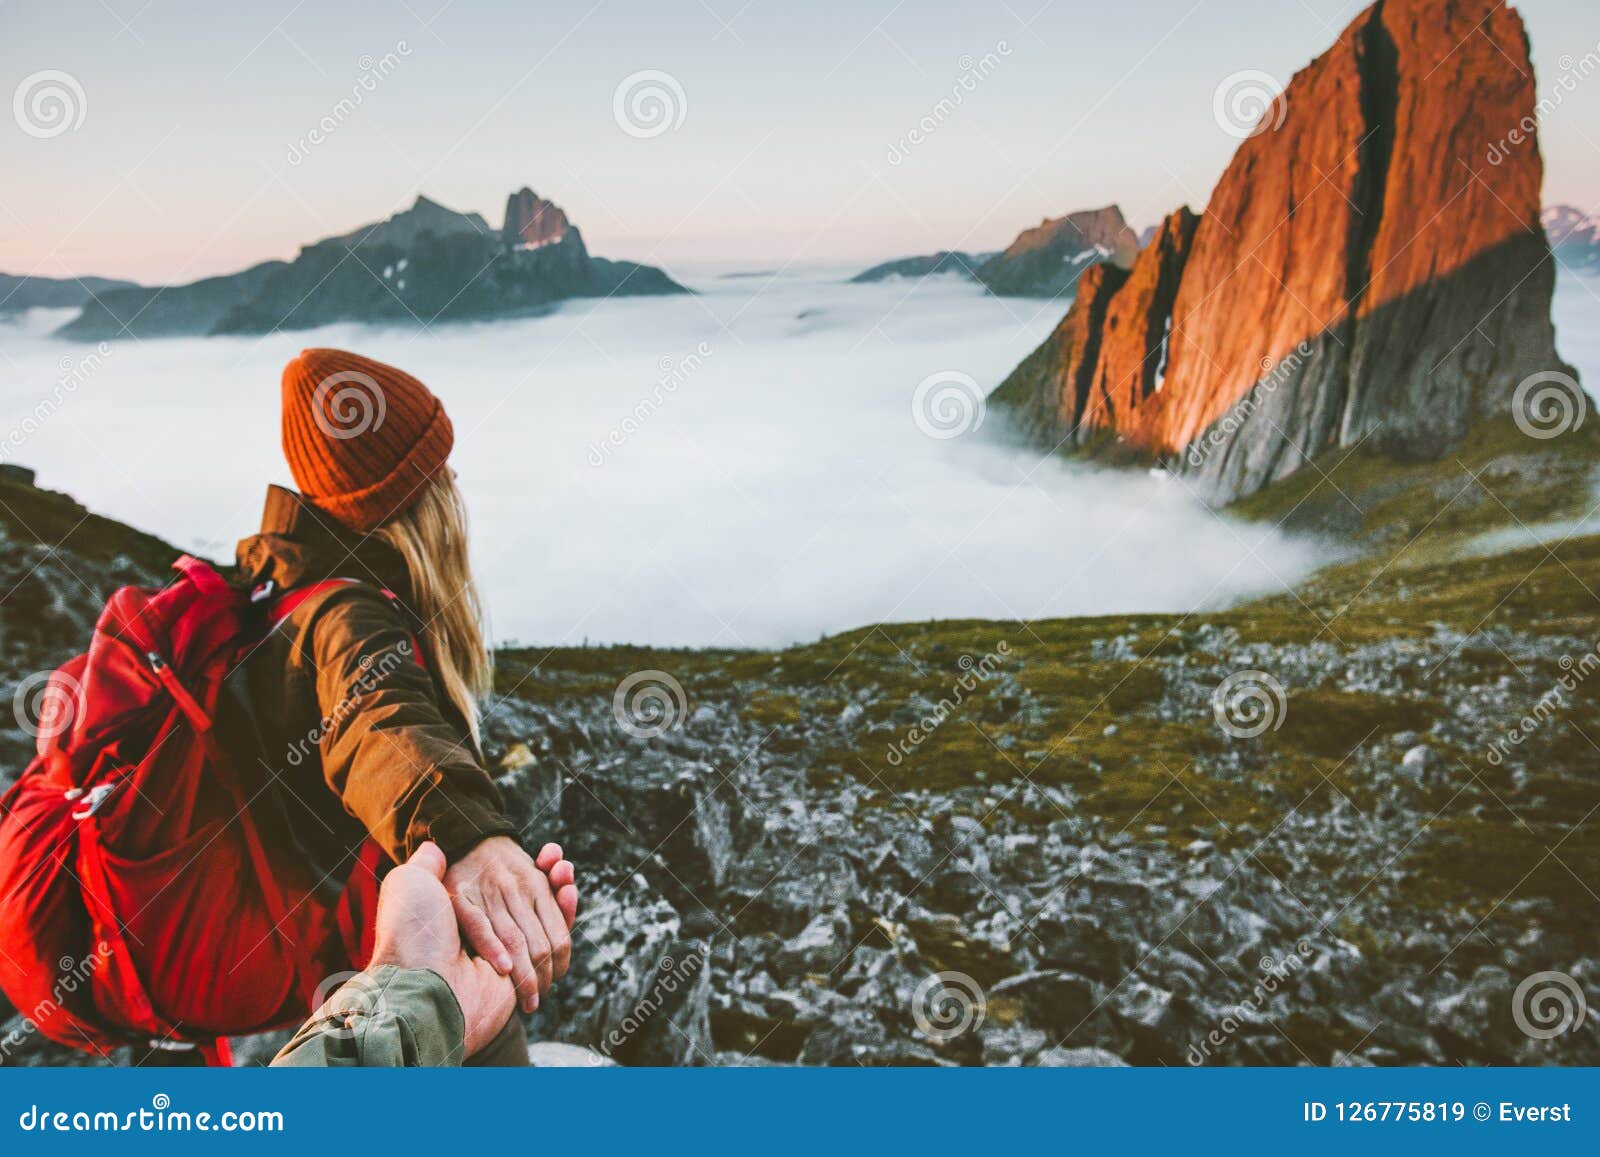 Couple Romantic Follow Hands Holding Hiking in Mountains Stock